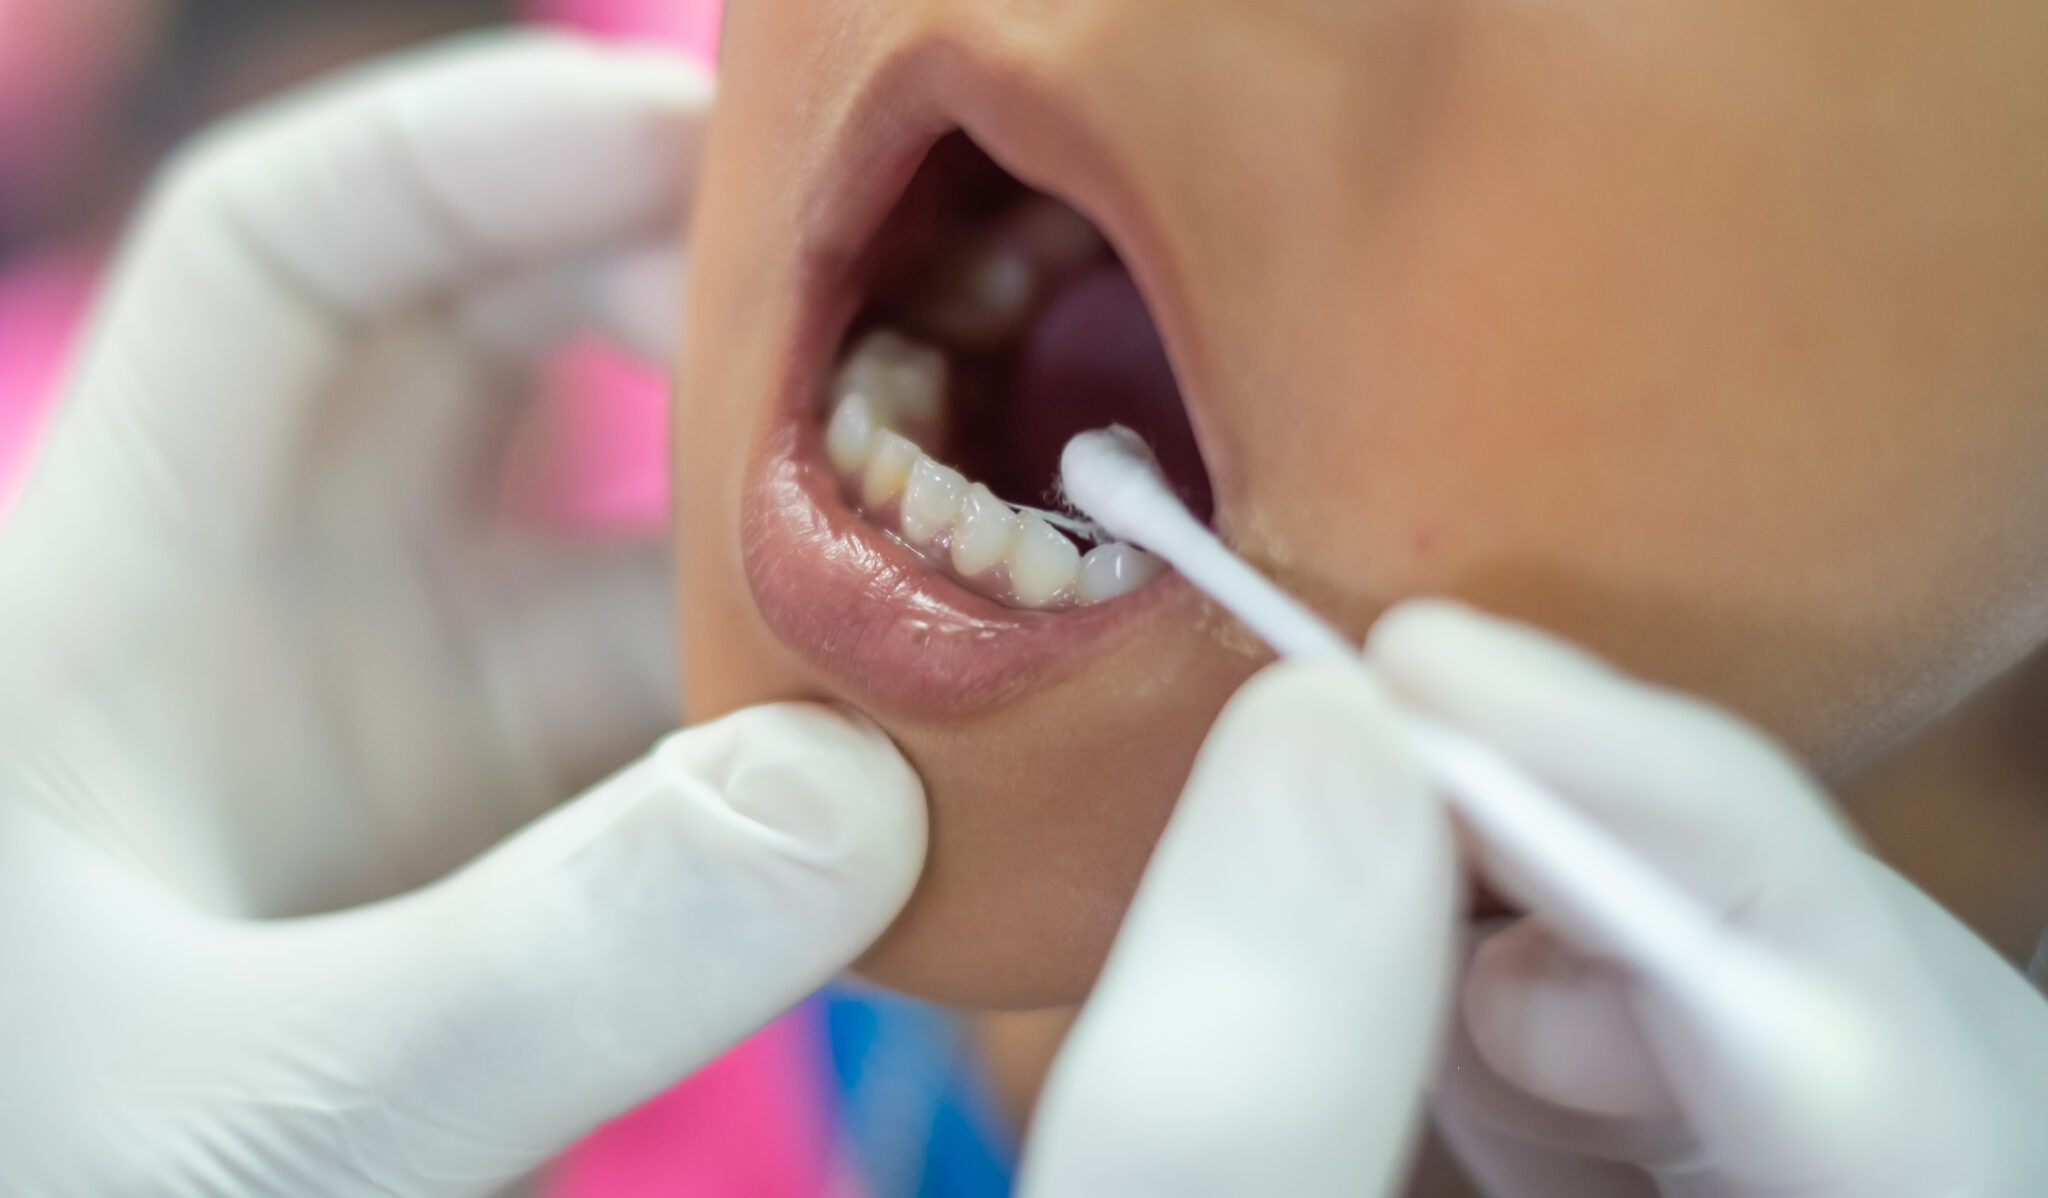 HOW CAN WE AVOID A CAVITY? PART I: USE FLUORIDE